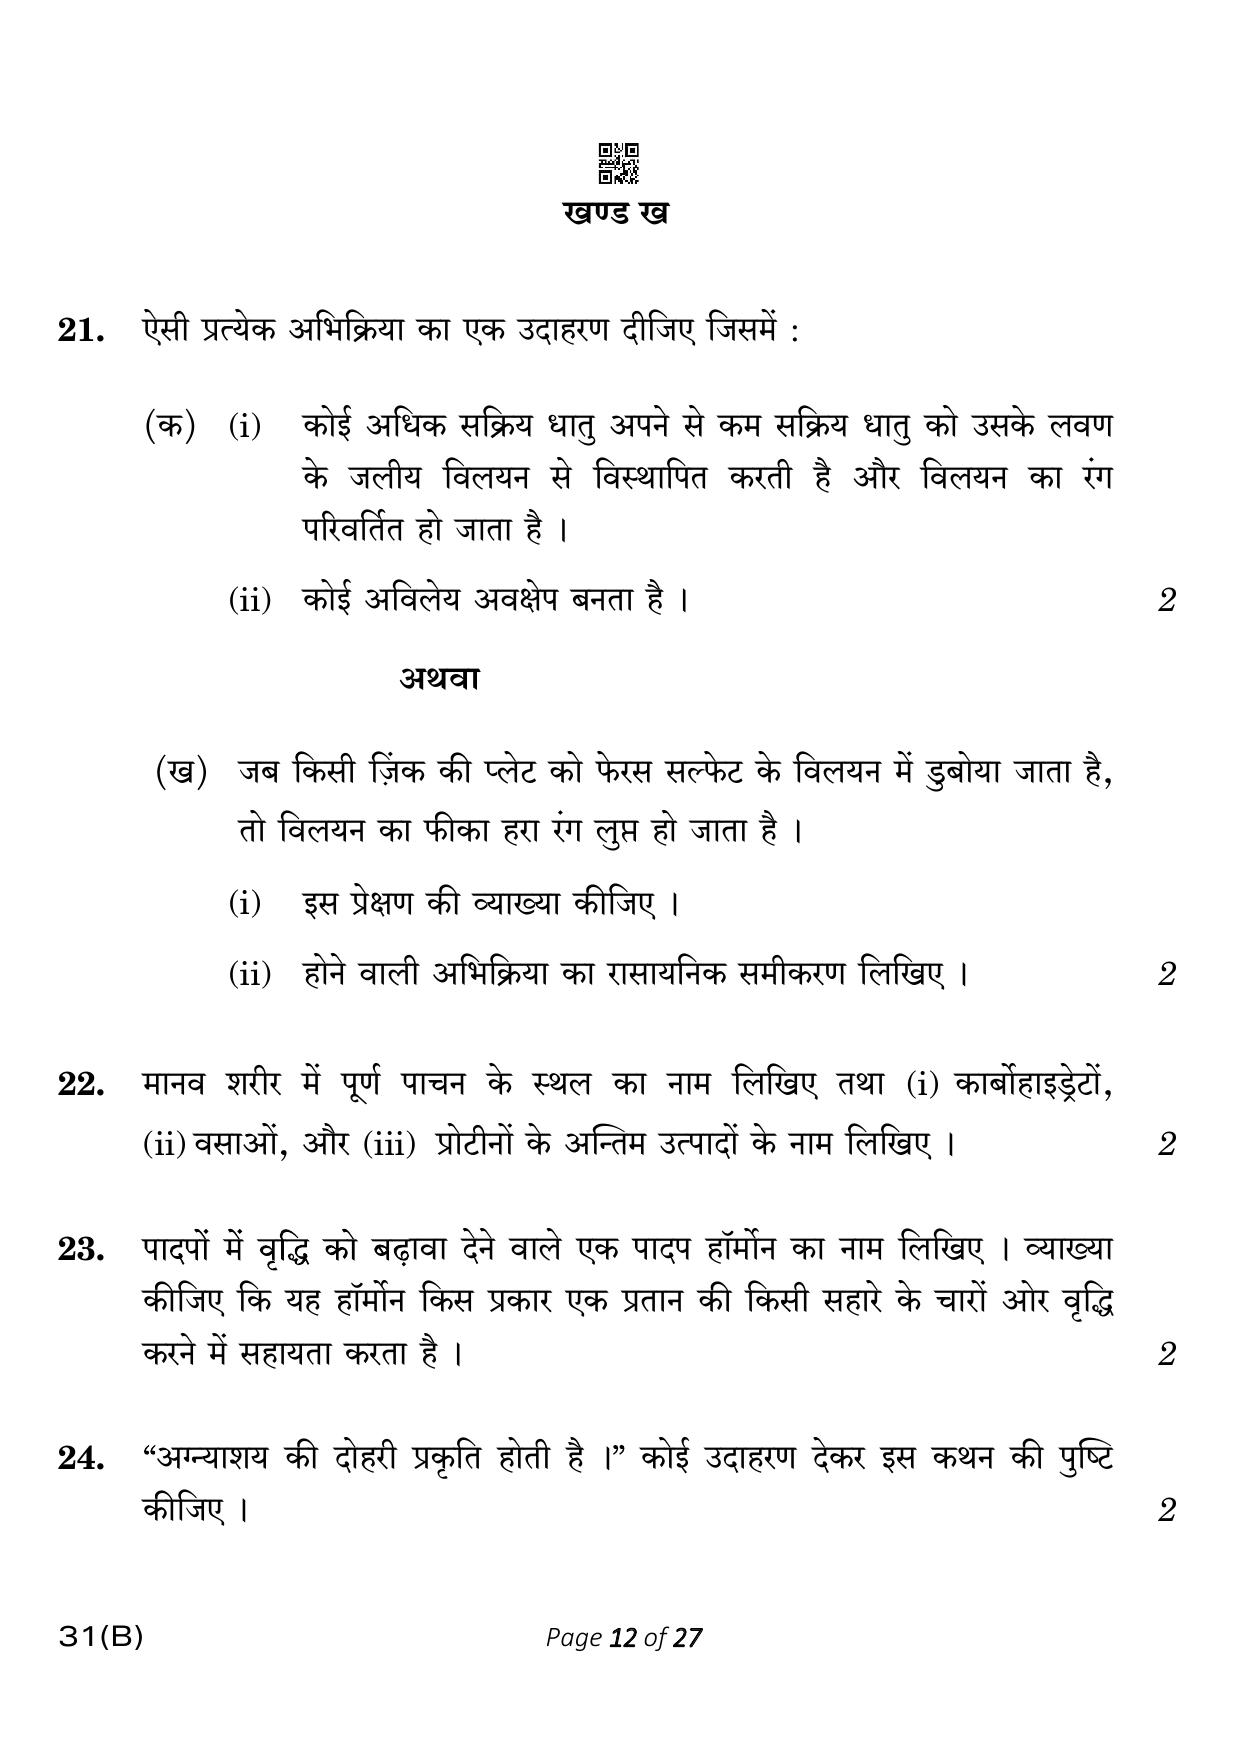 CBSE Class 10 31-B Science 2023 (Compartment) Question Paper - Page 12